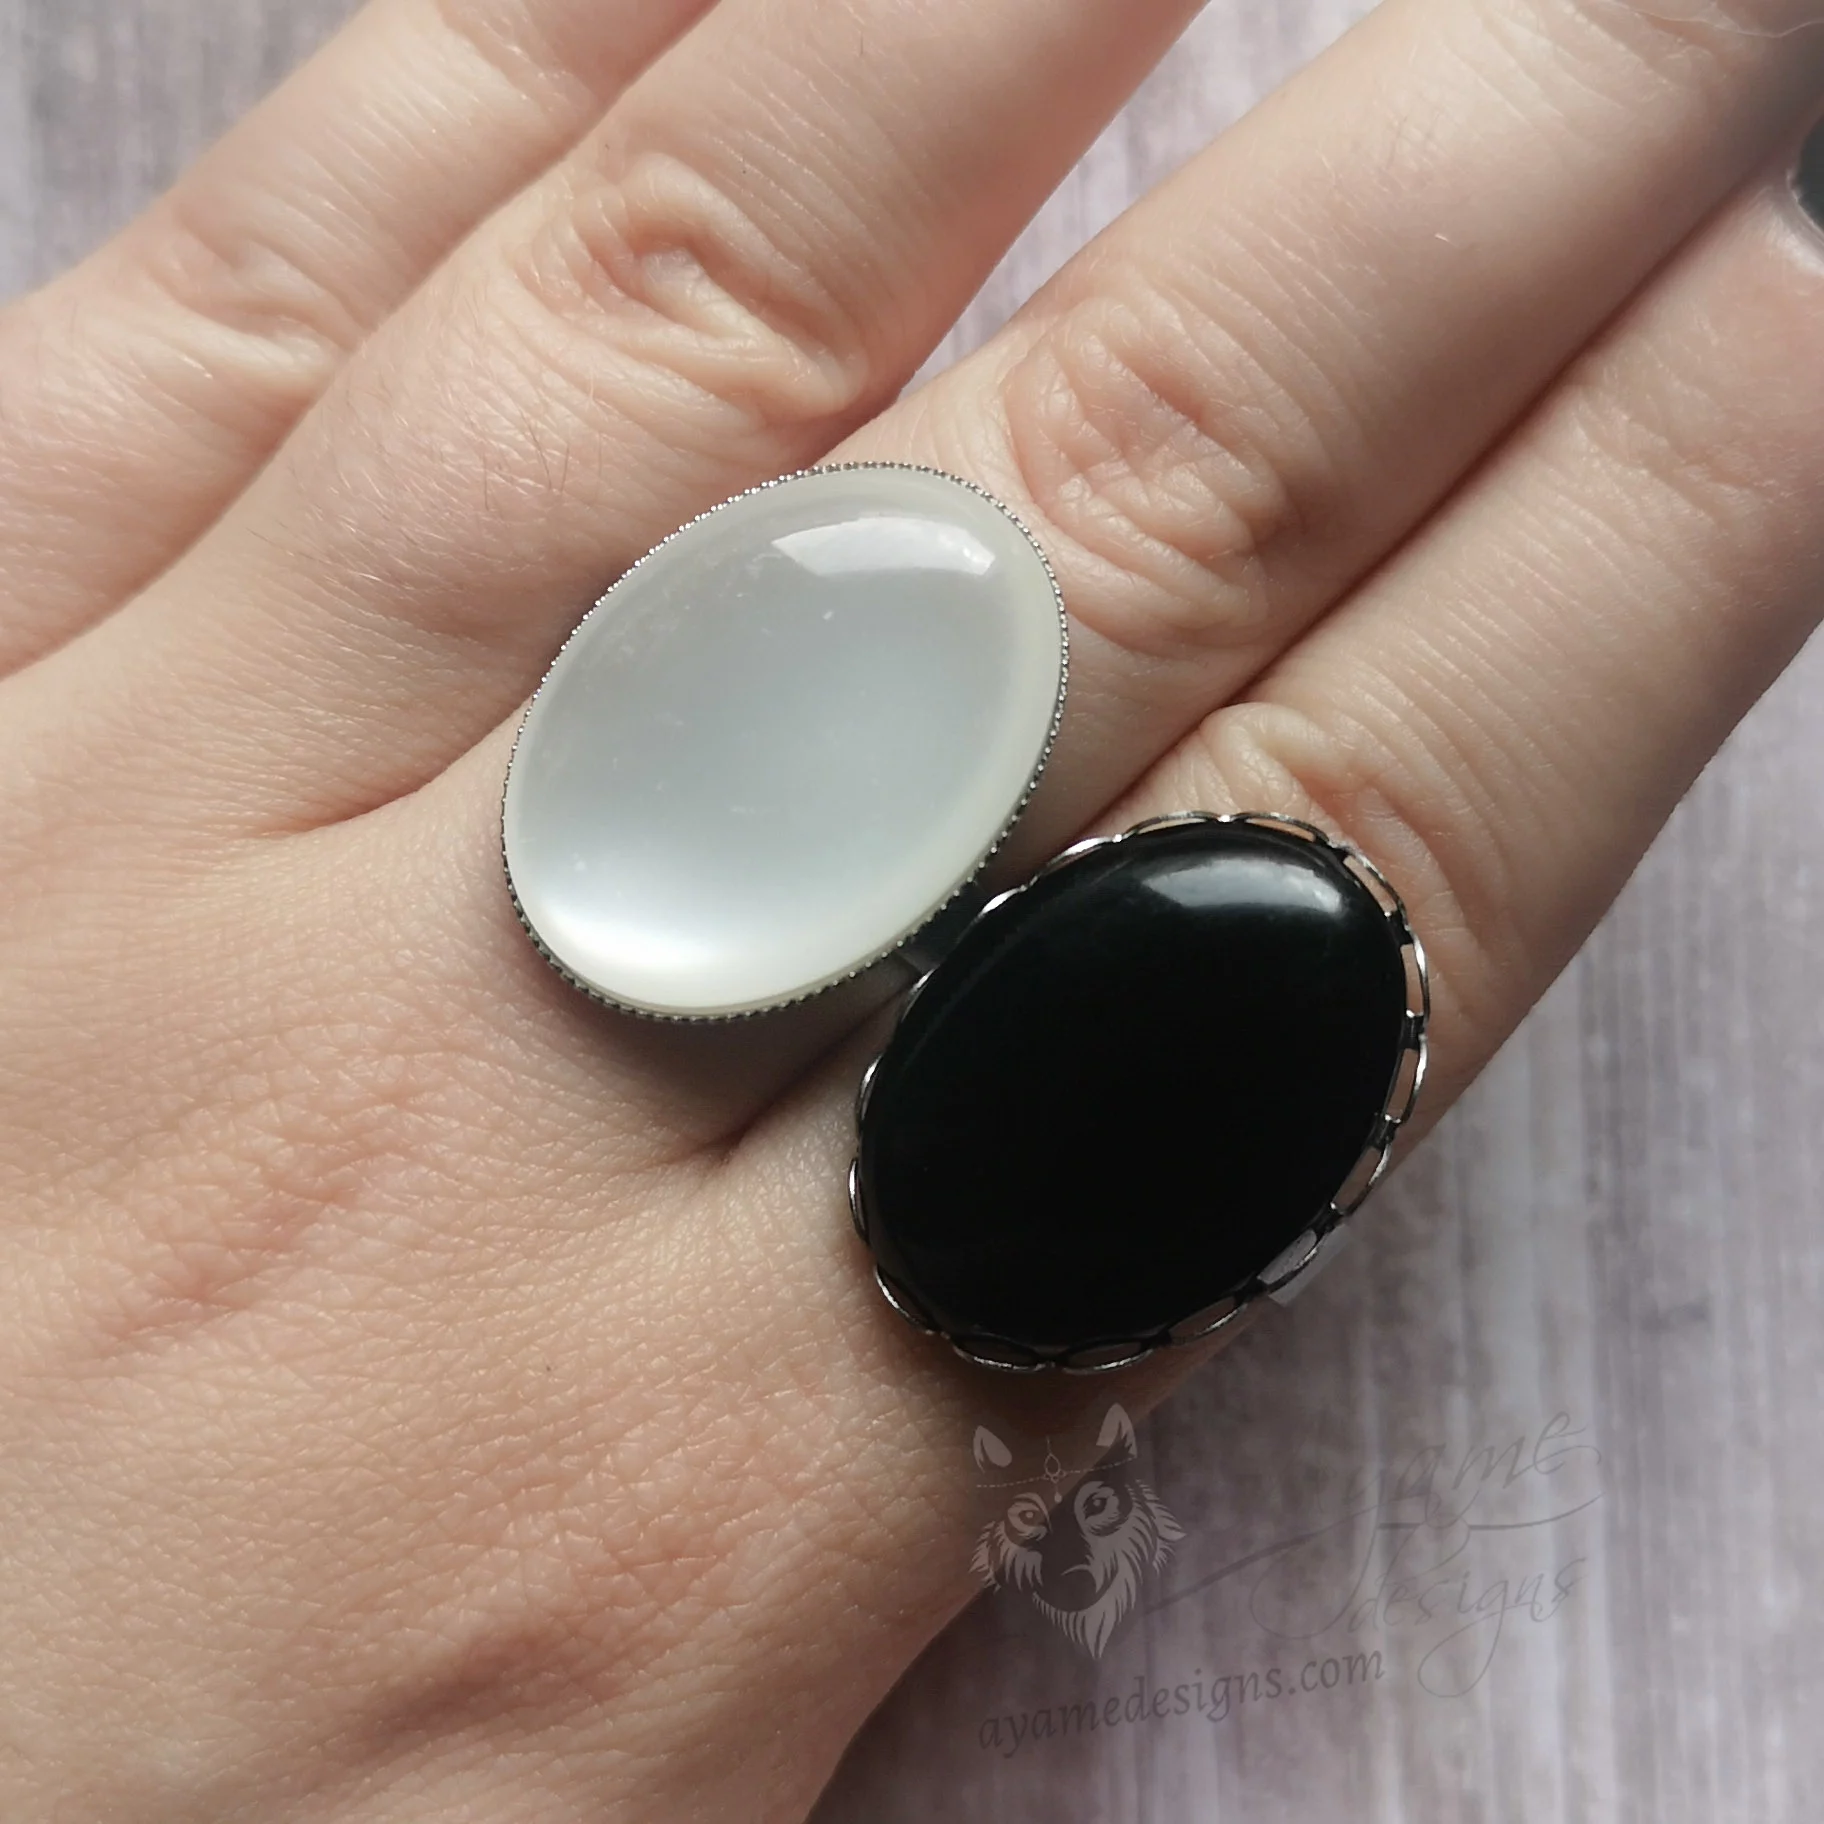 Adjustable stainless steel ring with resin cabochon